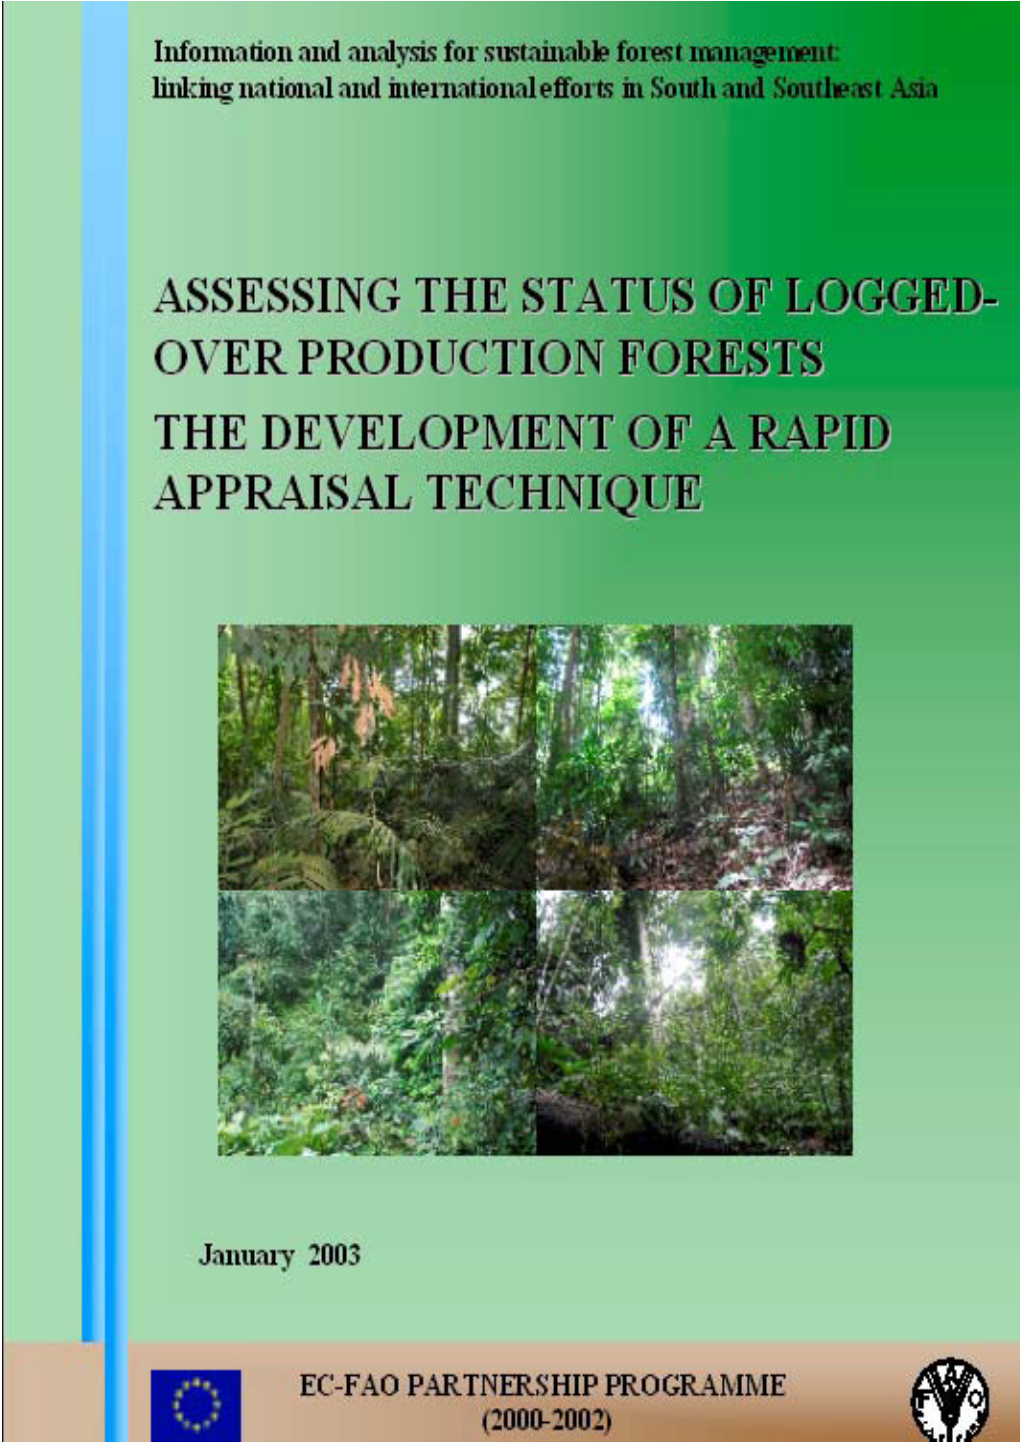 Assessing the Status of Logged-Over Production Forests the Development of a Rapid Appraisal Technique